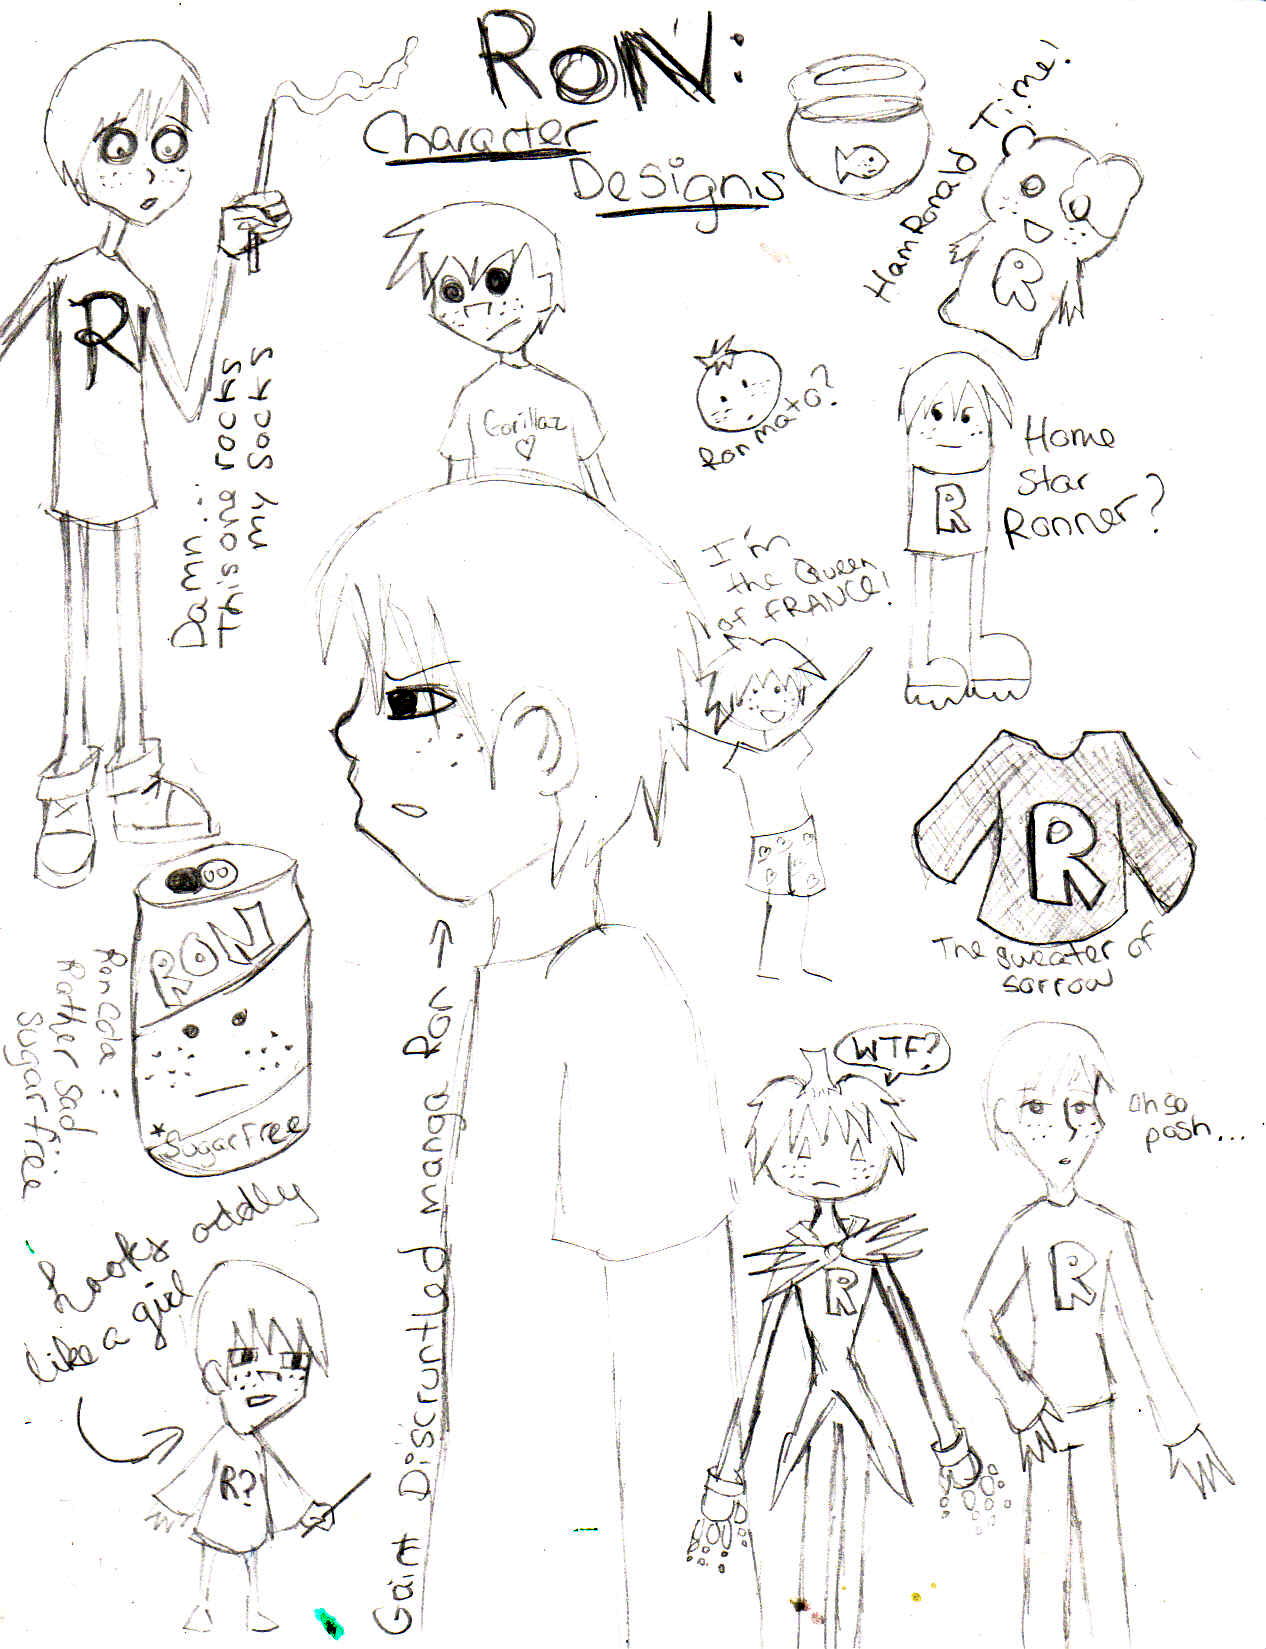 ron:character designs by NeverMore